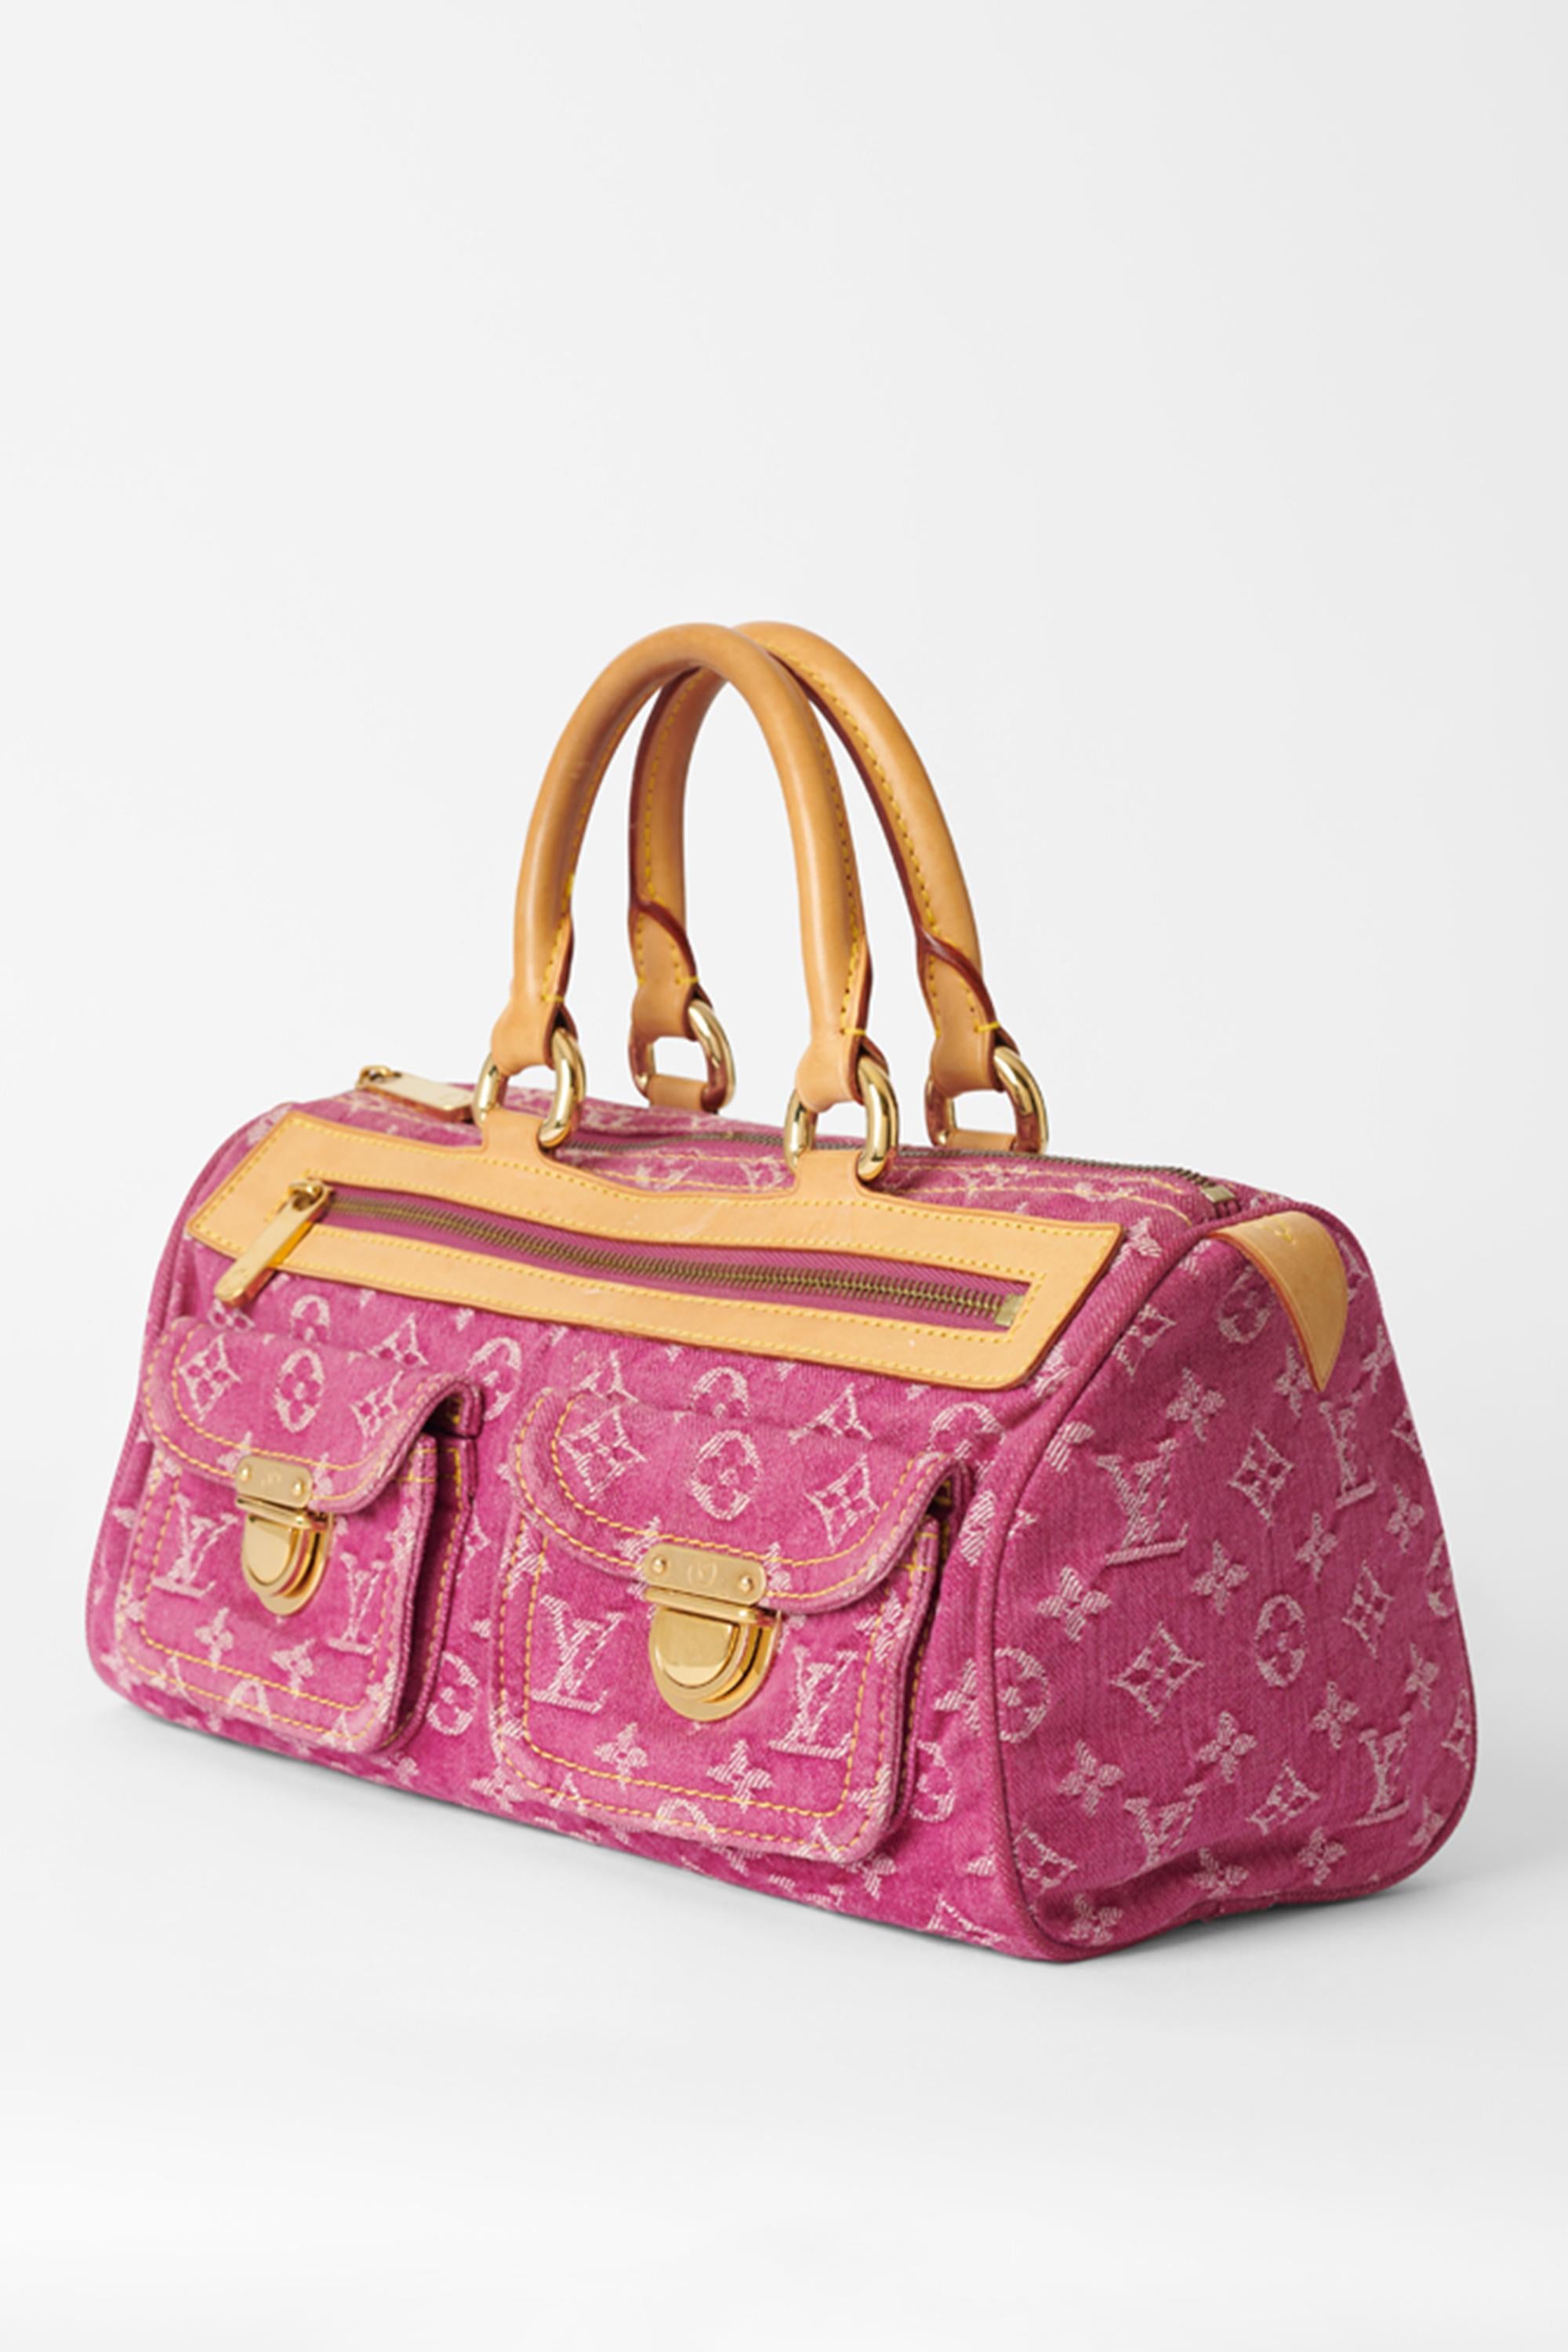 We are excited to present this Louis Vuitton 2006 pink denim speedy bag with matching scarf. Features allover monogram, double front pockets with LV hardware, zip front pocket and main compartment with zip closure. Top handle bag with gold hardware